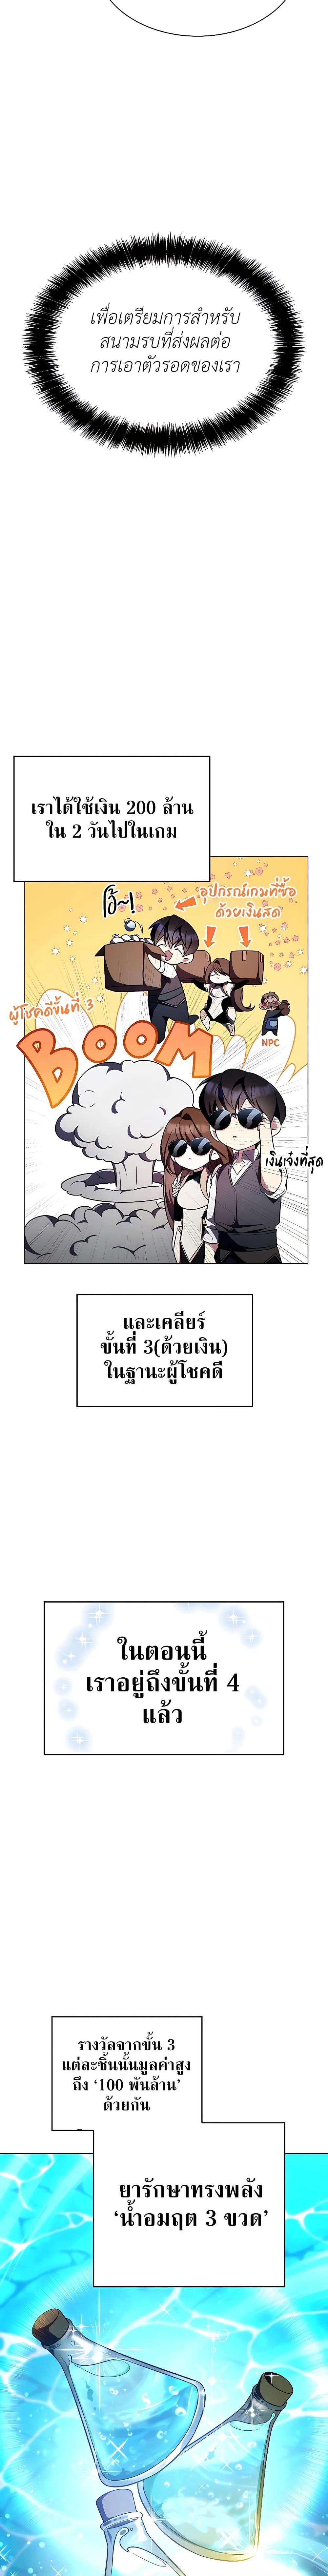 My Lucky Encounter From the Game Turned Into Reality ตอนที่ 4 (18)